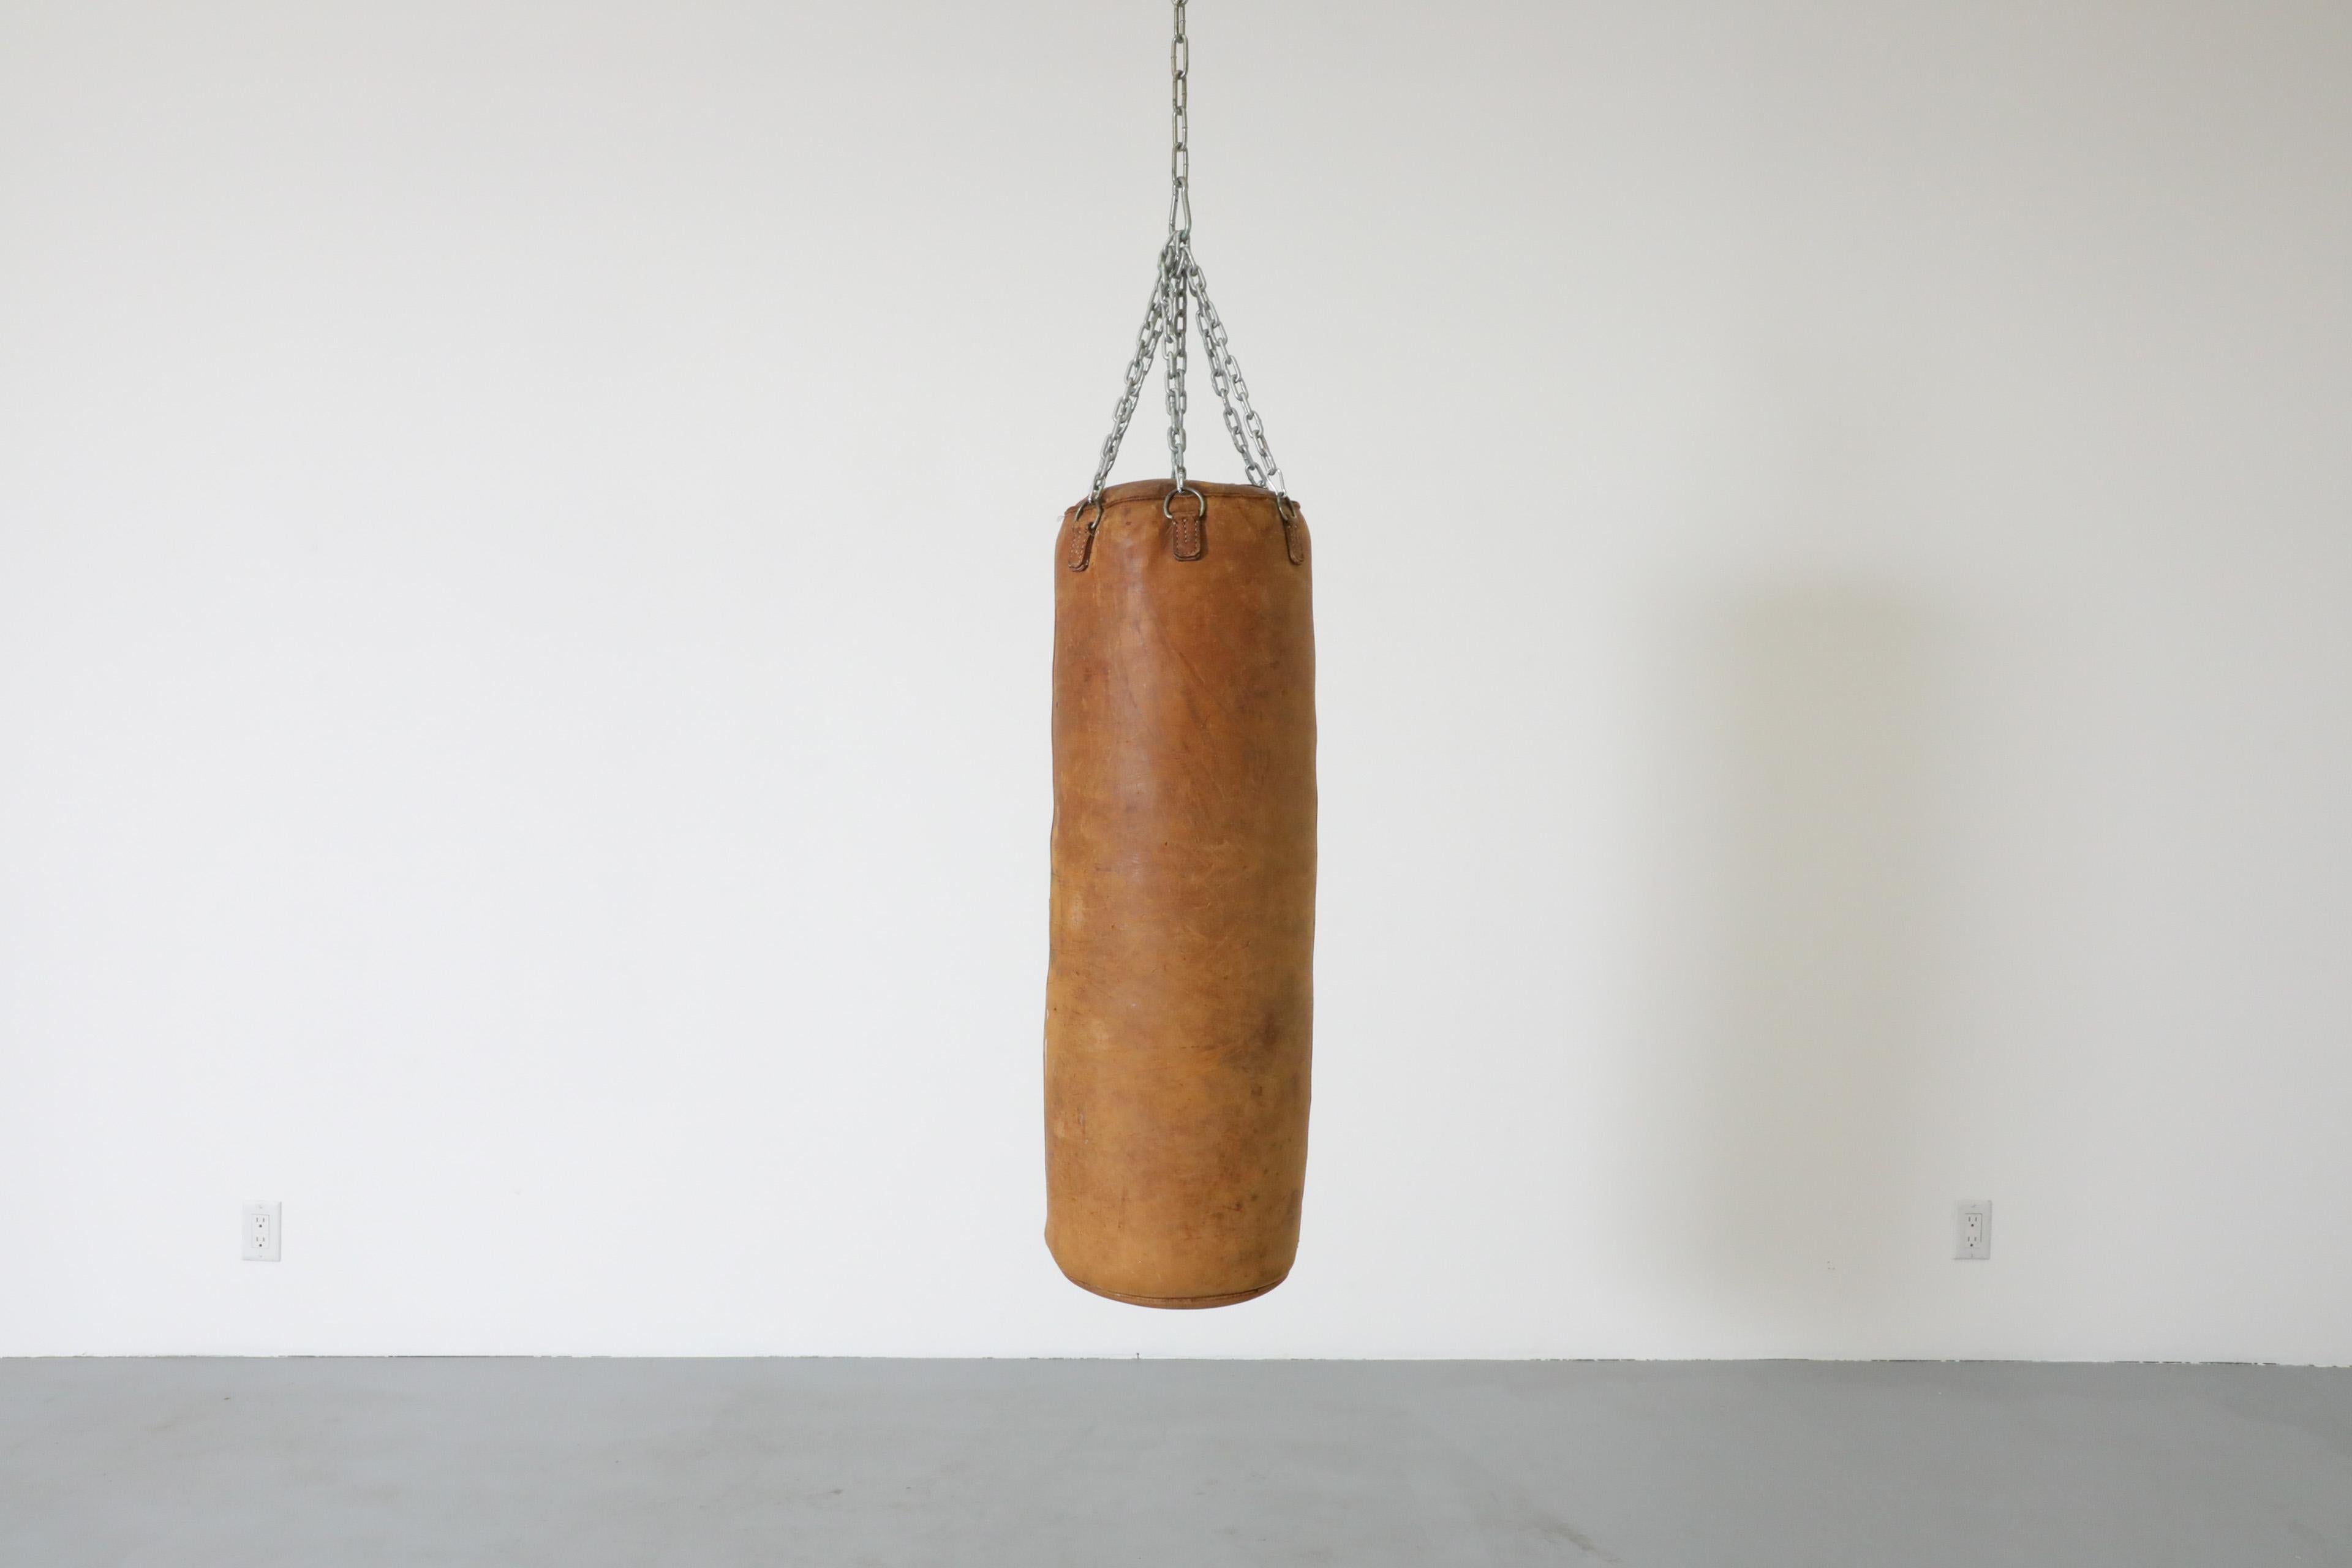 Vintage punching bag with handsome, worn genuine leather. A stylish addition to a home gym, this hanging punching bag is approximately 30lbs and is in original condition with some visible wear. More of a decorative accent this piece is NOT recommend